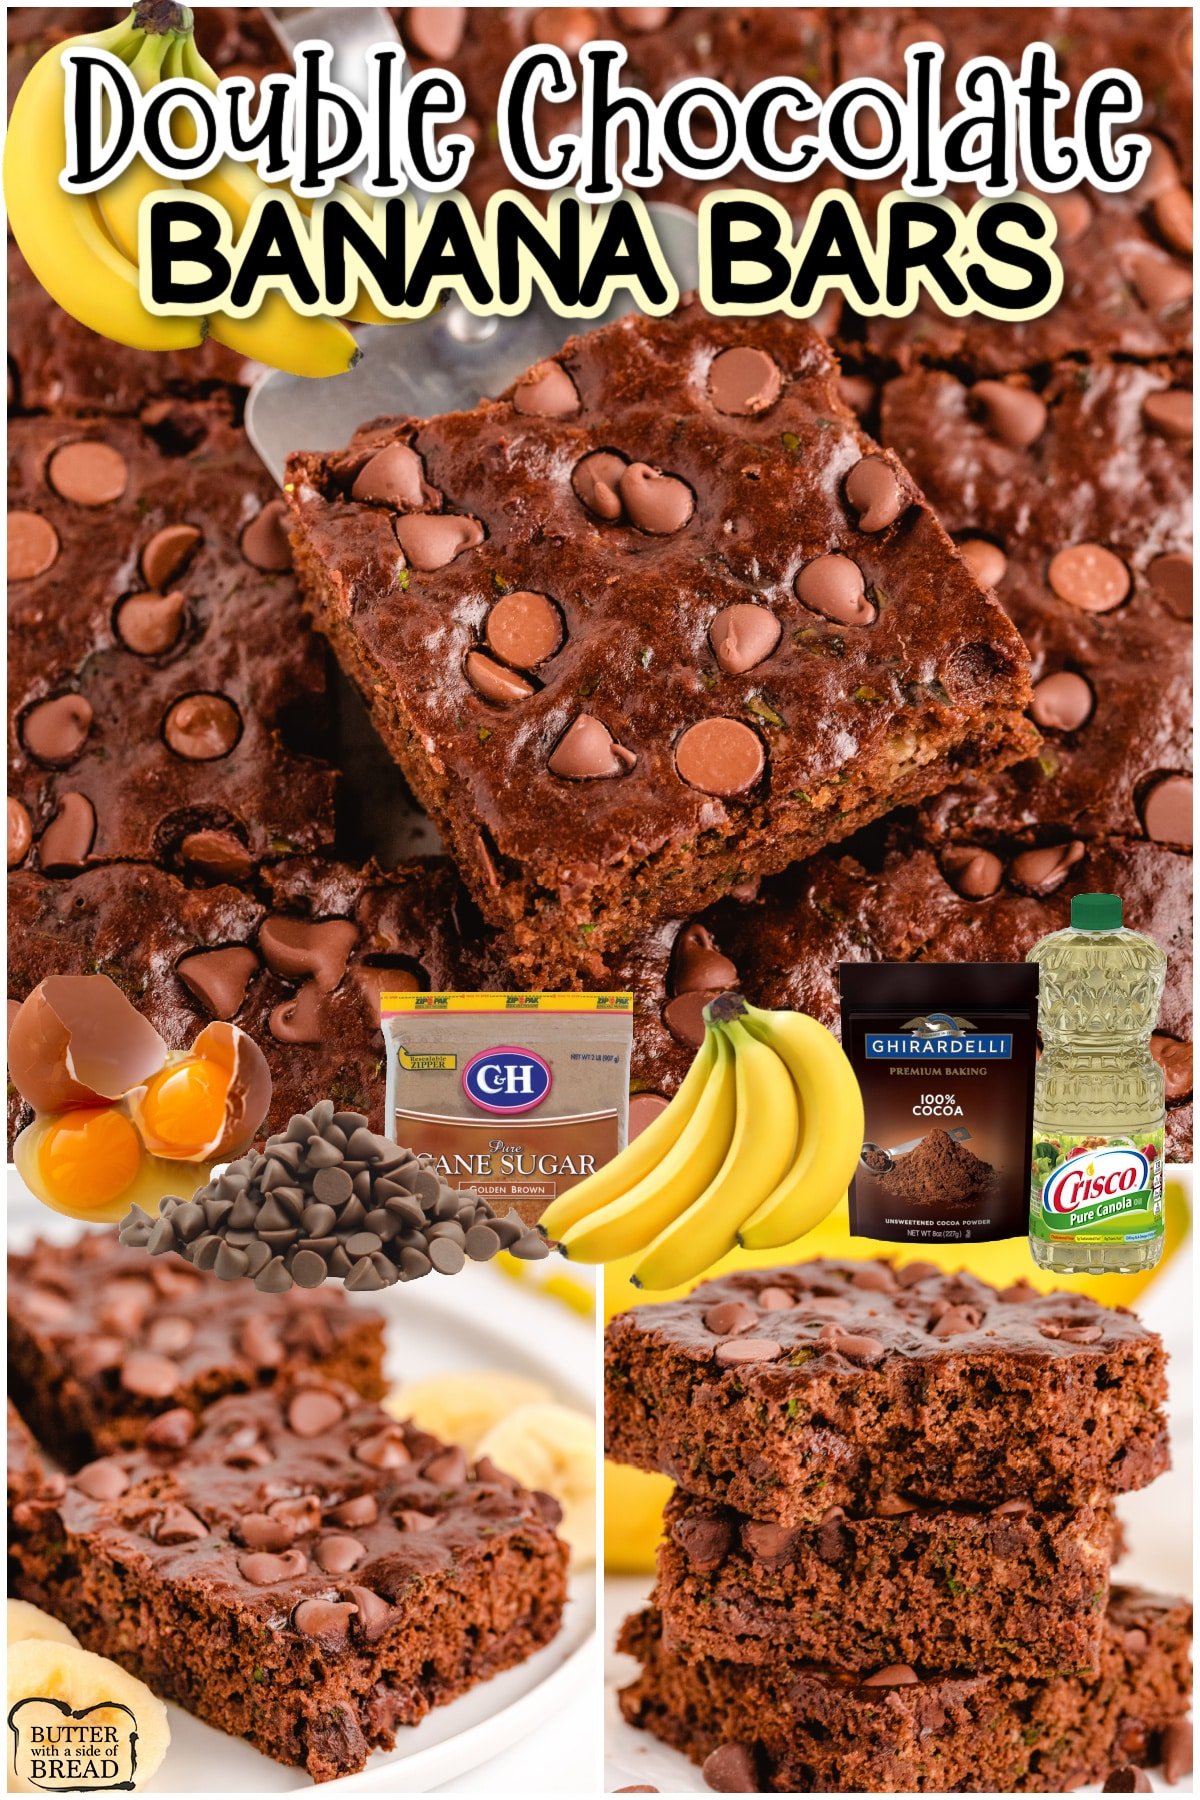 Double Chocolate Banana Bars are made with 5 ripe bananas & are so delicious! This chocolate banana bread recipe is perfectly sweet & great for breakfast, snack or even dessert!